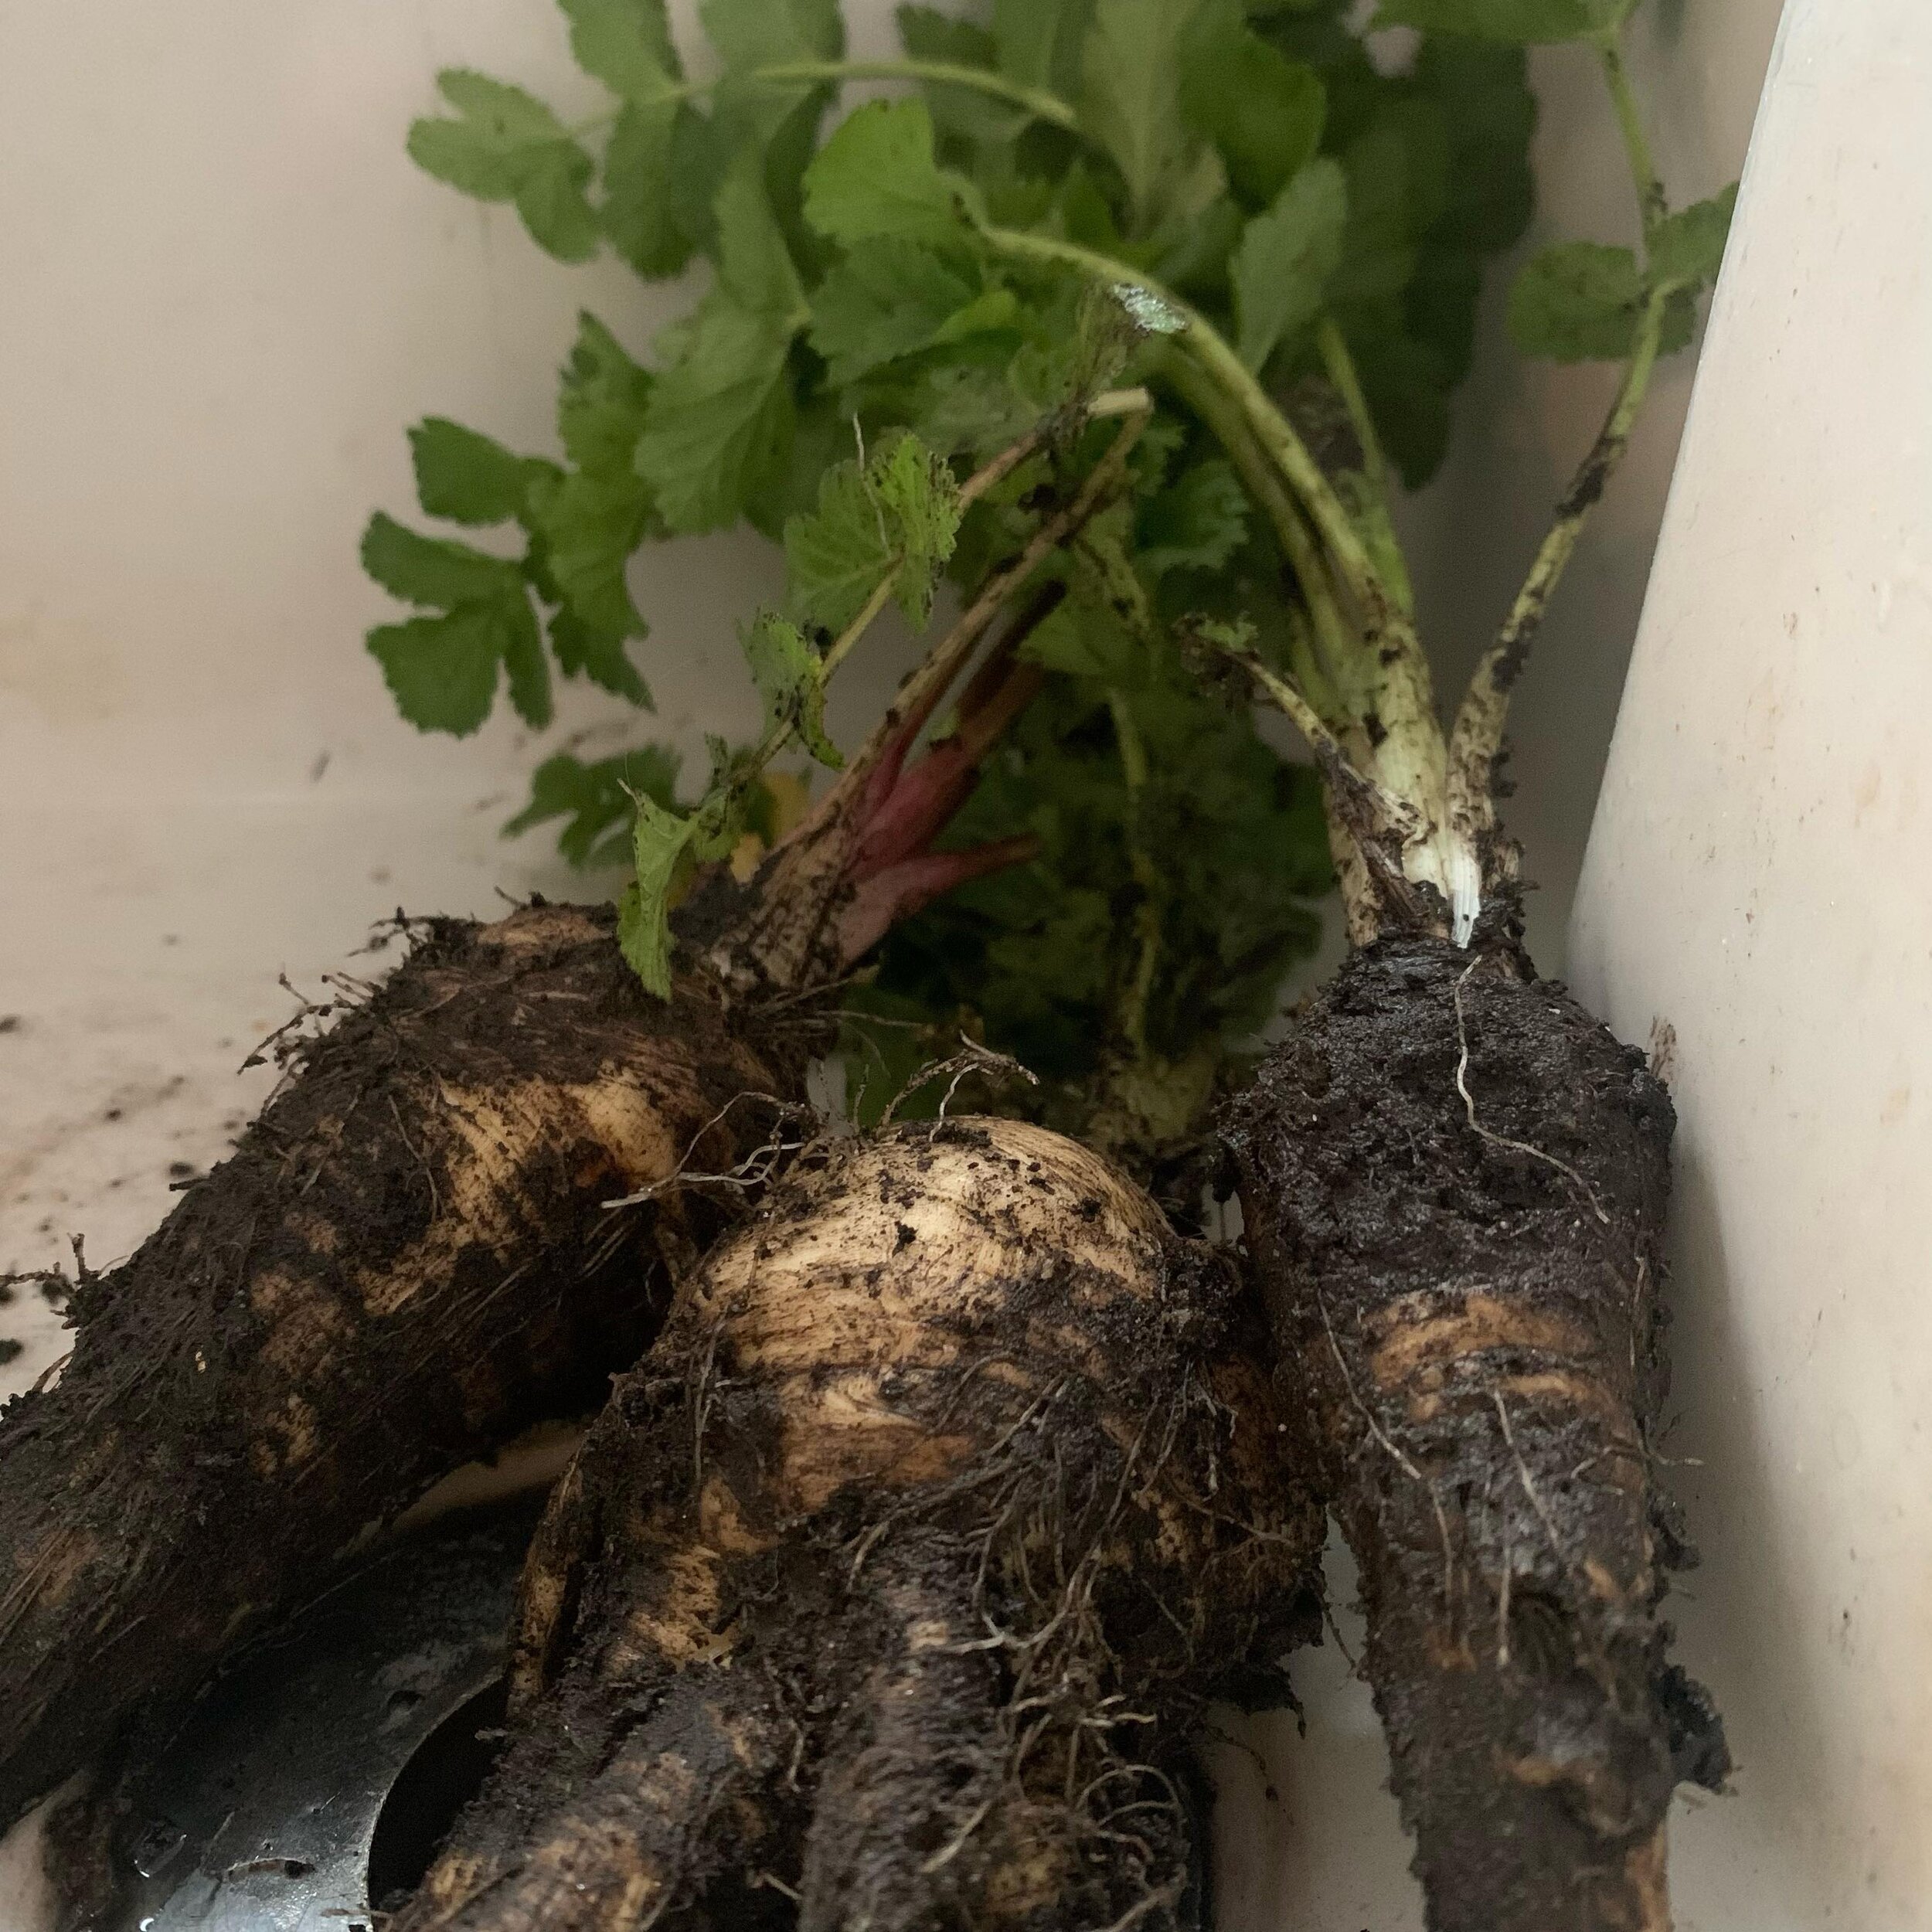 Yummy home grown parsnips. Having struggled to grow these and carrots, I finally had success by growing them in cardboard boxes. They take quite a while to germinate so I suspect I was just impatient in the past and planted other things in its space 